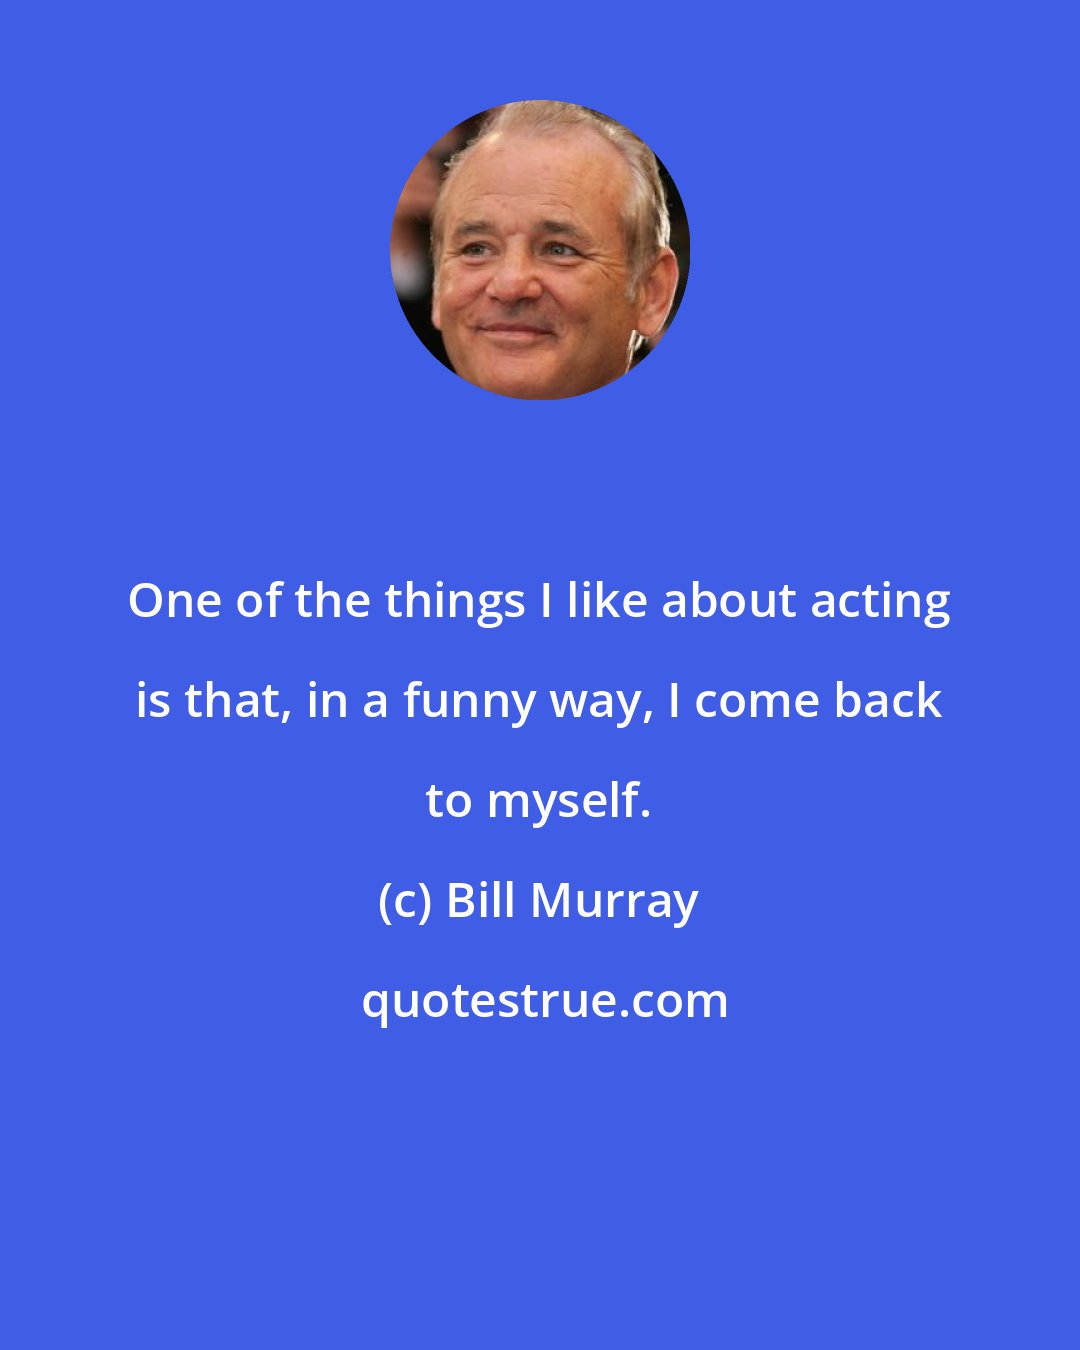 Bill Murray: One of the things I like about acting is that, in a funny way, I come back to myself.